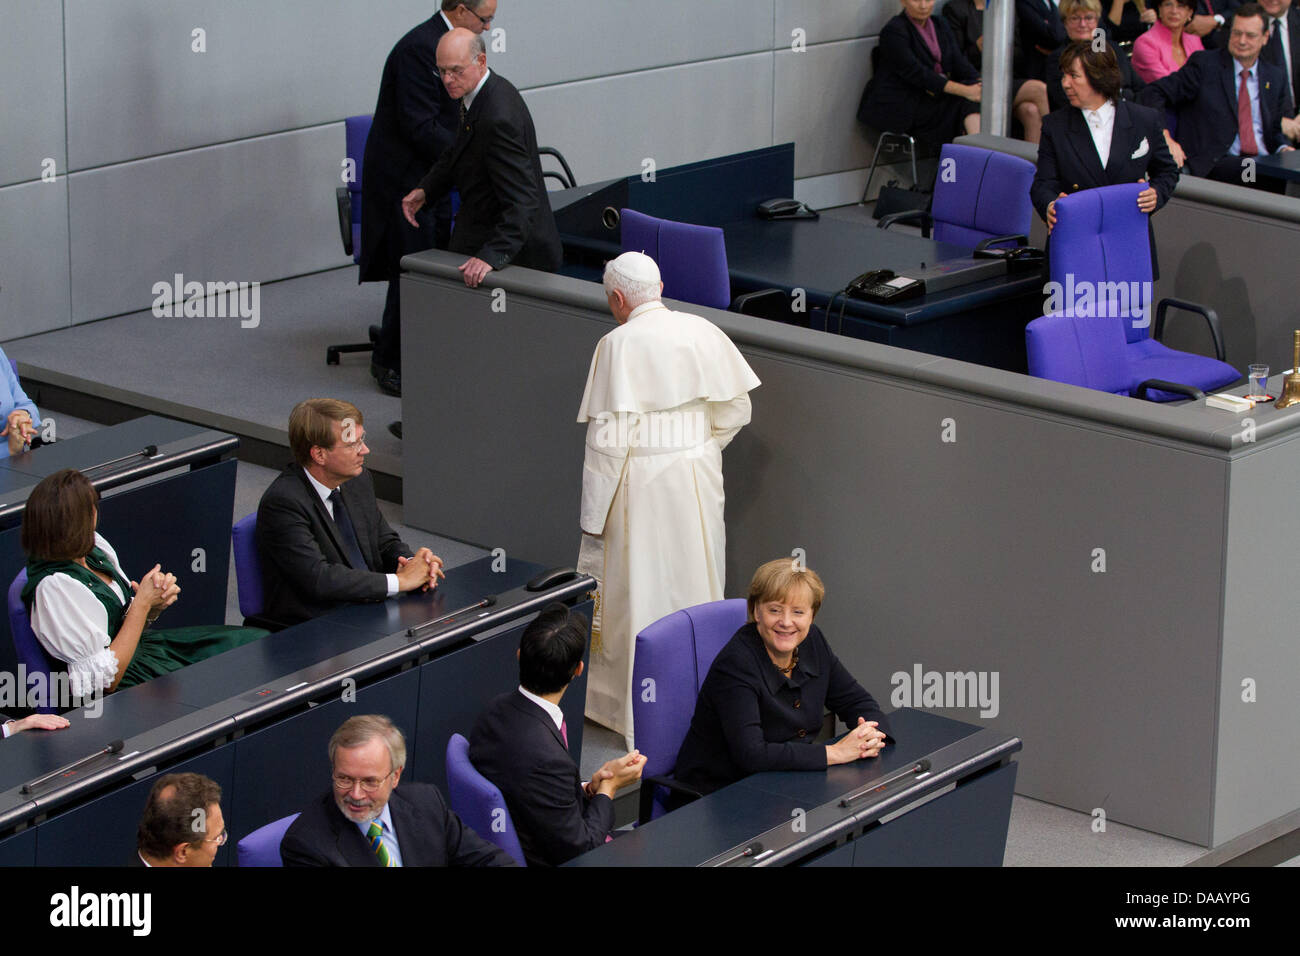 Pope Benedict XVI is being helped by President of Parliament Norbert Lammert after he took the wrong way to the speakers podium to deliver his speech in the Bundestag, Germany's parliament, in Berlin, Germany, 22 September, 2011. The head of the Roman Catholic Church is visiting Germany from 22-25 September 2011. At left is German Chancellor Angela Merkel. Foto: Herbert Knosowski d Stock Photo